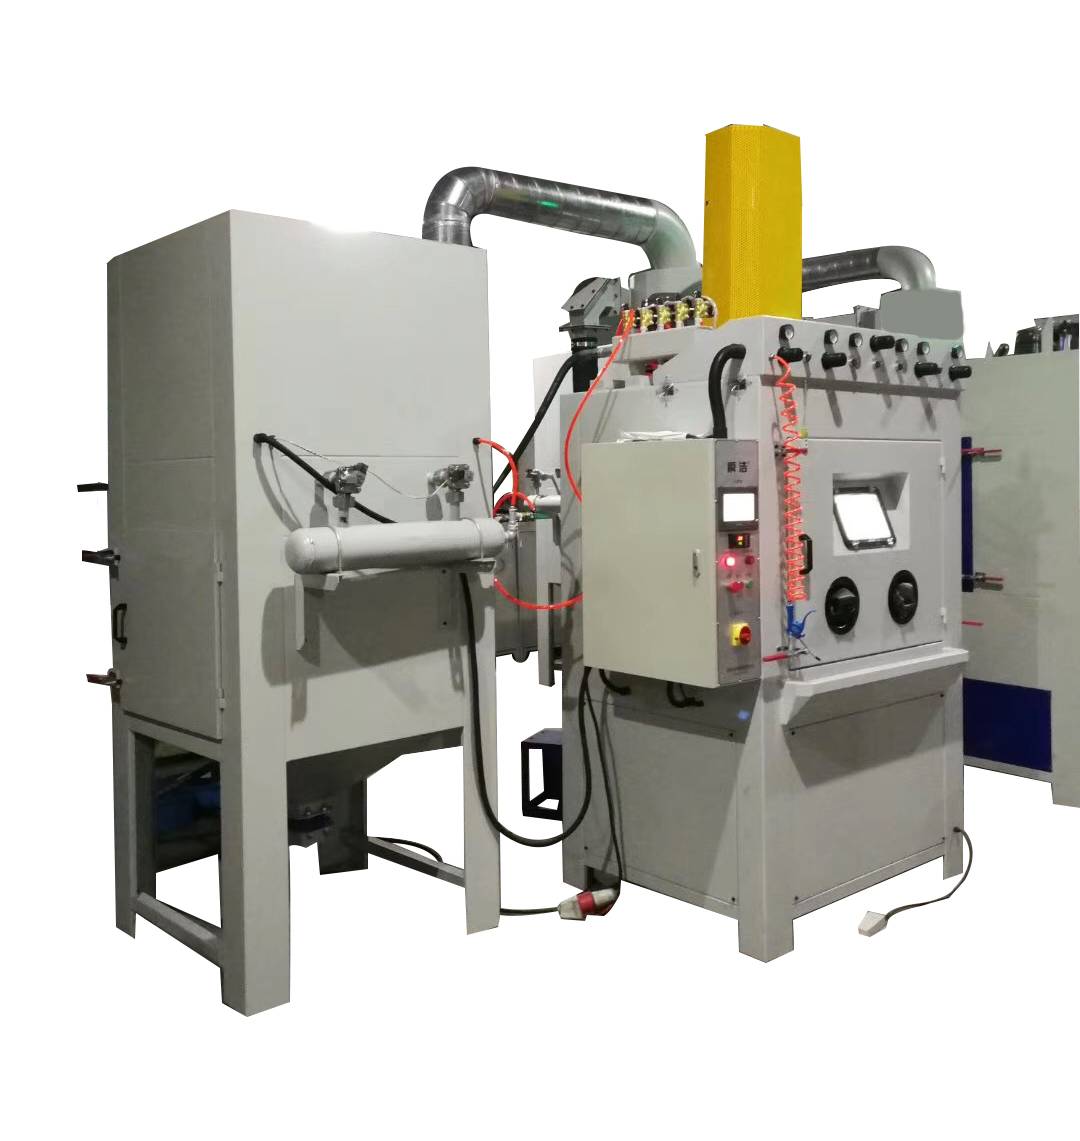 Automatic sandblast cabinet for small parts Featured Image